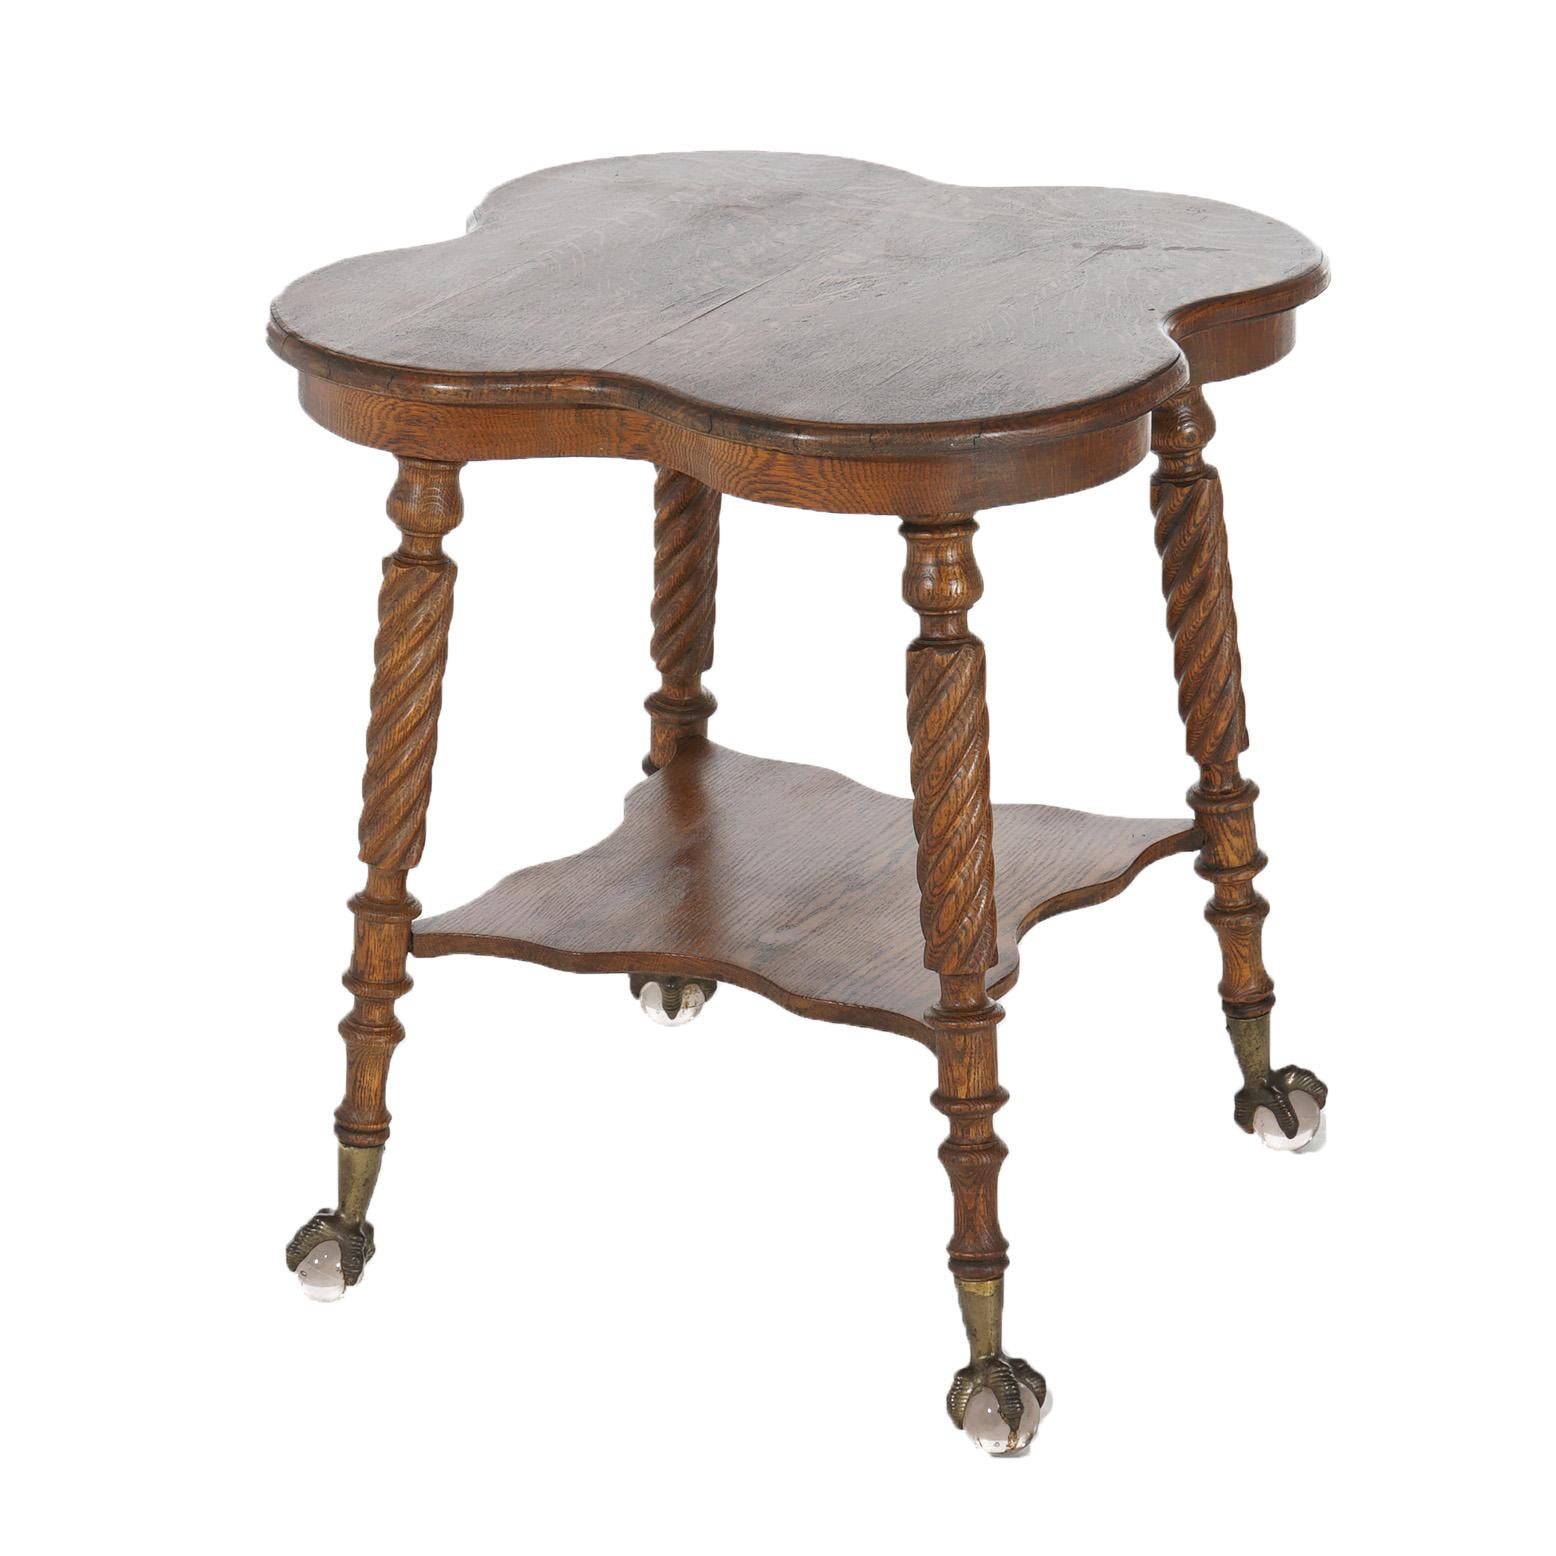 ***Ask About Reduced In-House Delivery Rates - Reliable Professional Service & Fully Insured***
Antique Horner School Oak Cloverleaf Claw Foot & Crystal Table With Twisted Legs

Measures- 29.5''H x 33''W x 33''D